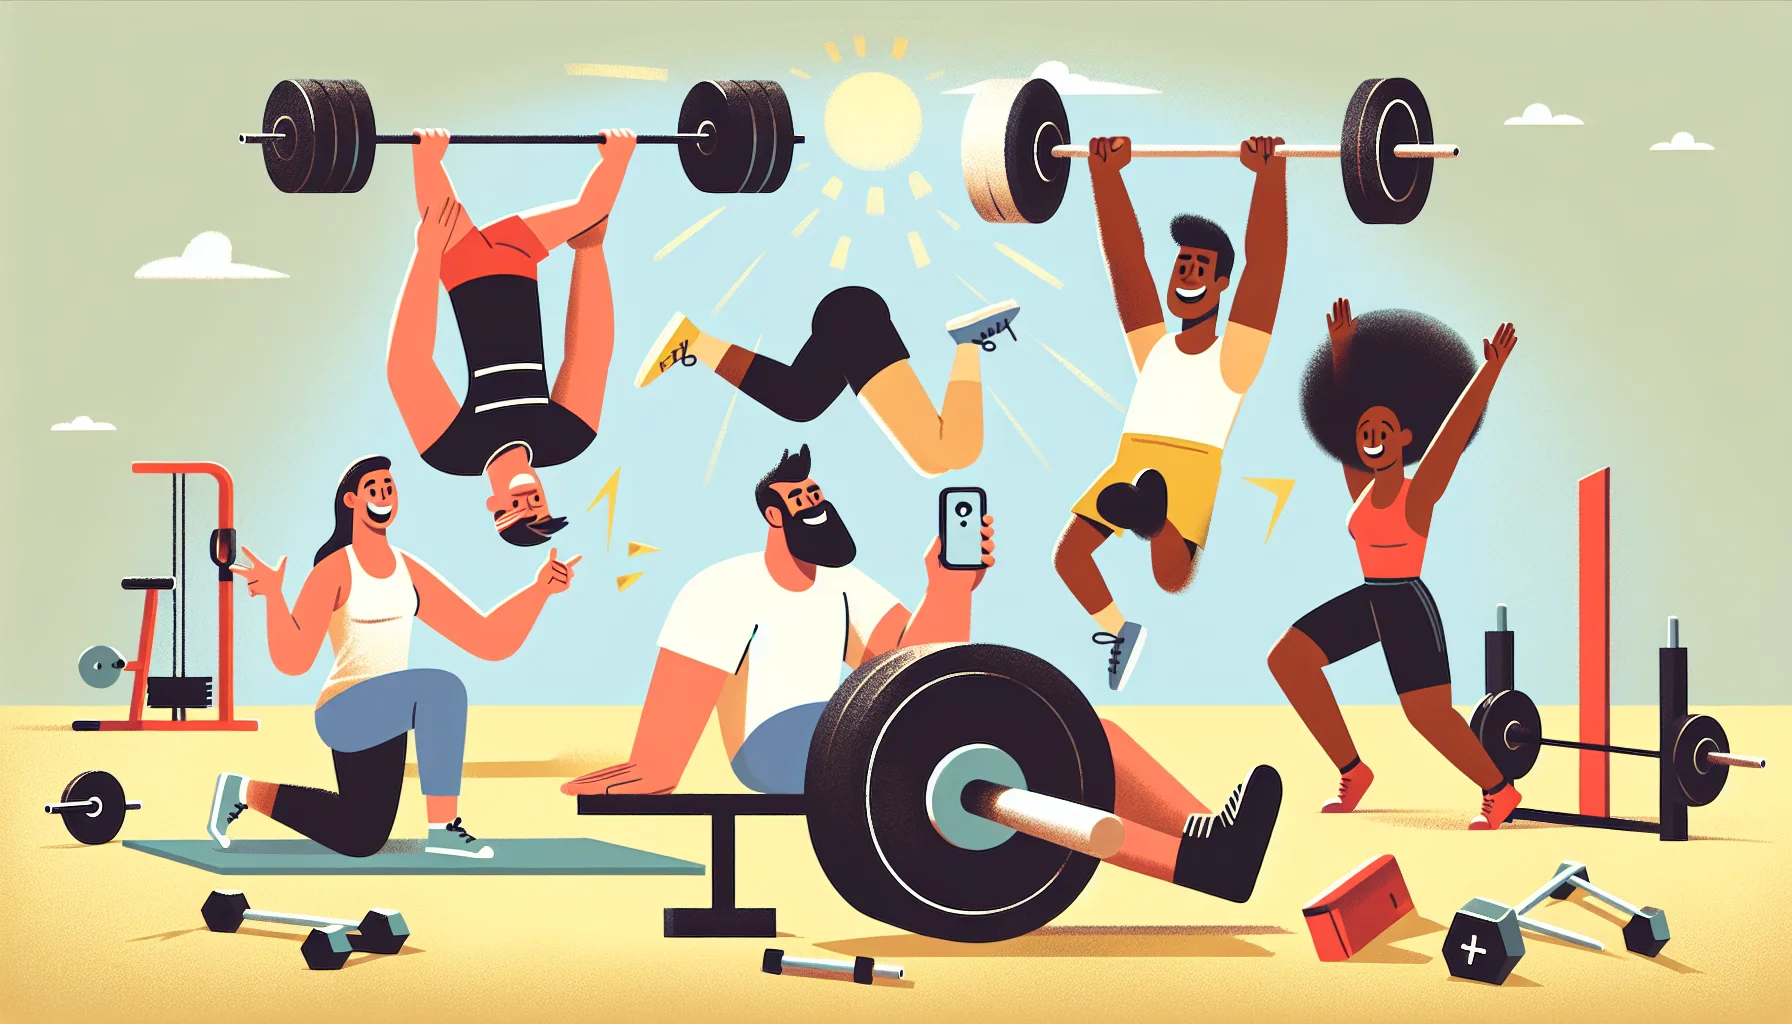 Depict a humorous scene set in a gym where a variety of individuals are participating in calisthenics and weightlifting exercises. Would you please include a Caucasian woman doing a handstand push-up with a surprised expression, a Hispanic man attempting to lift a barbell that’s slightly too heavy, and a Black woman taking a selfie while plank. Make each character transmitting enthusiasm and joy, and inject a sense of fun in the image to make it appealing and enticing for those considering starting a fitness journey.